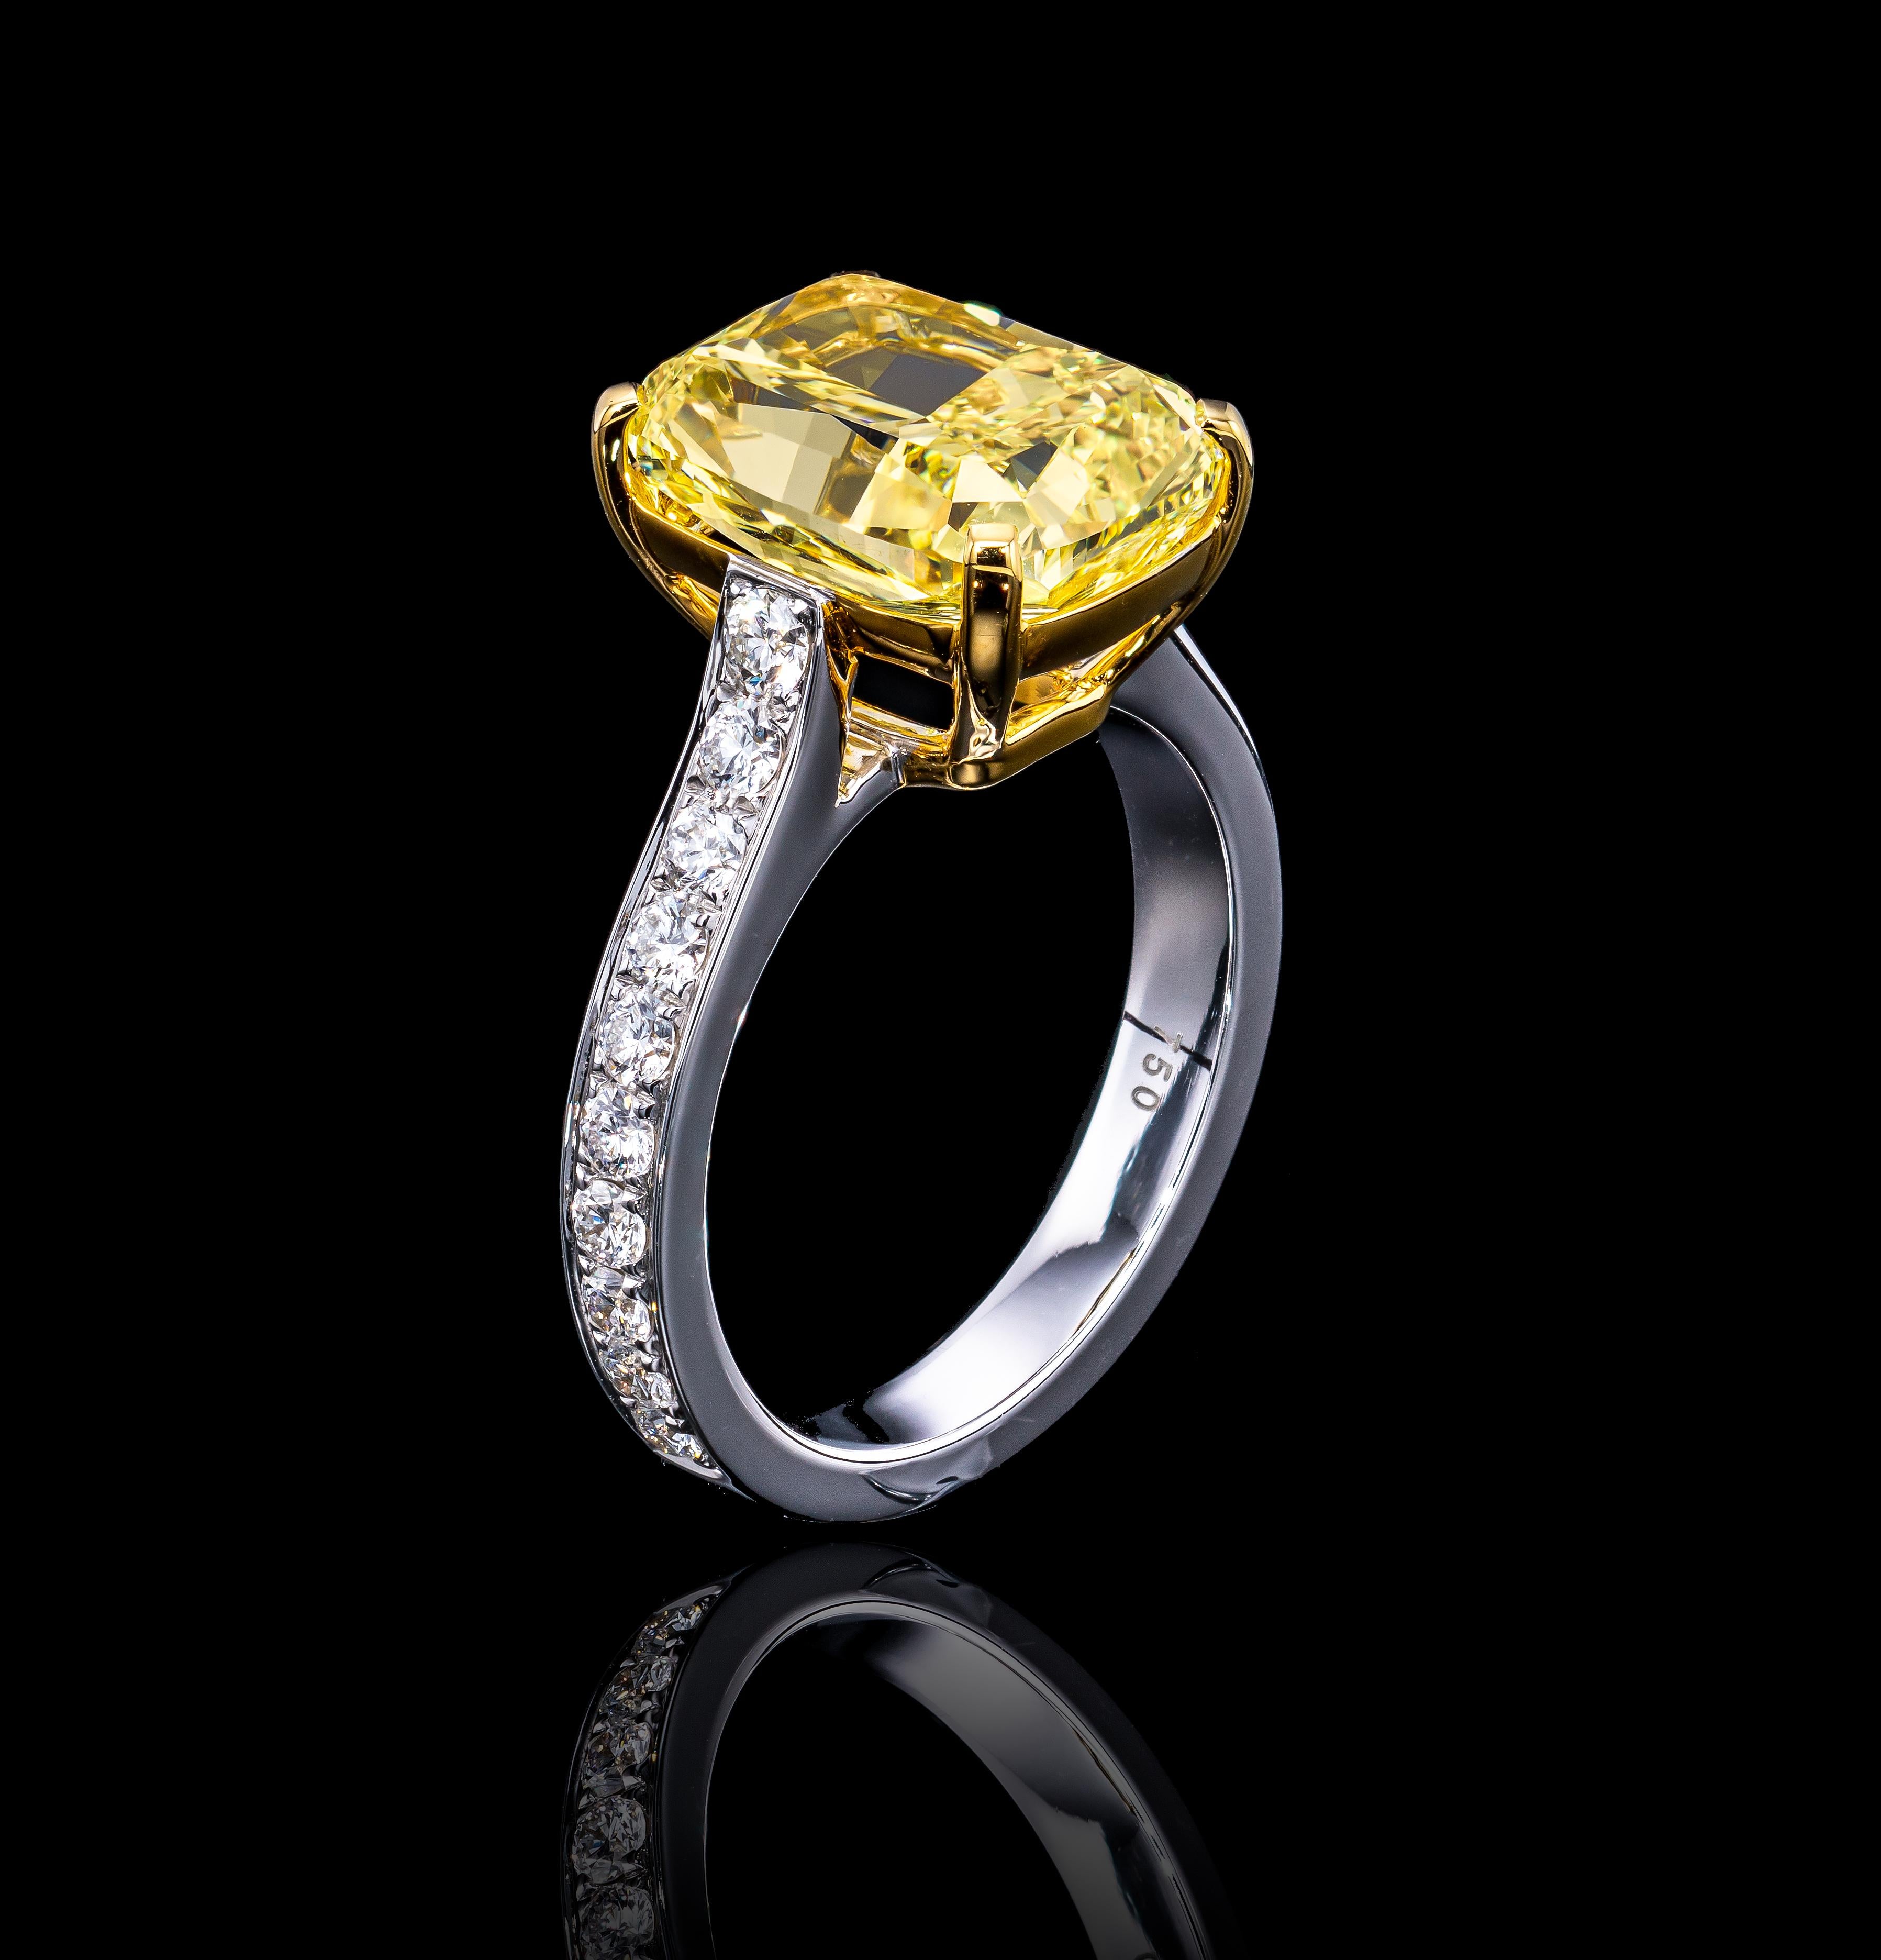 Hand Crafted 6.30 TCW Fancy Intense Yellow diamond ring that is designed to endure glamour anywhere you go. 
The timeless ring features a stunning Cushion cut 5.73 Carat GIA certified Natural Fancy Yellow diamond VS1 clarity. The diamond is accented